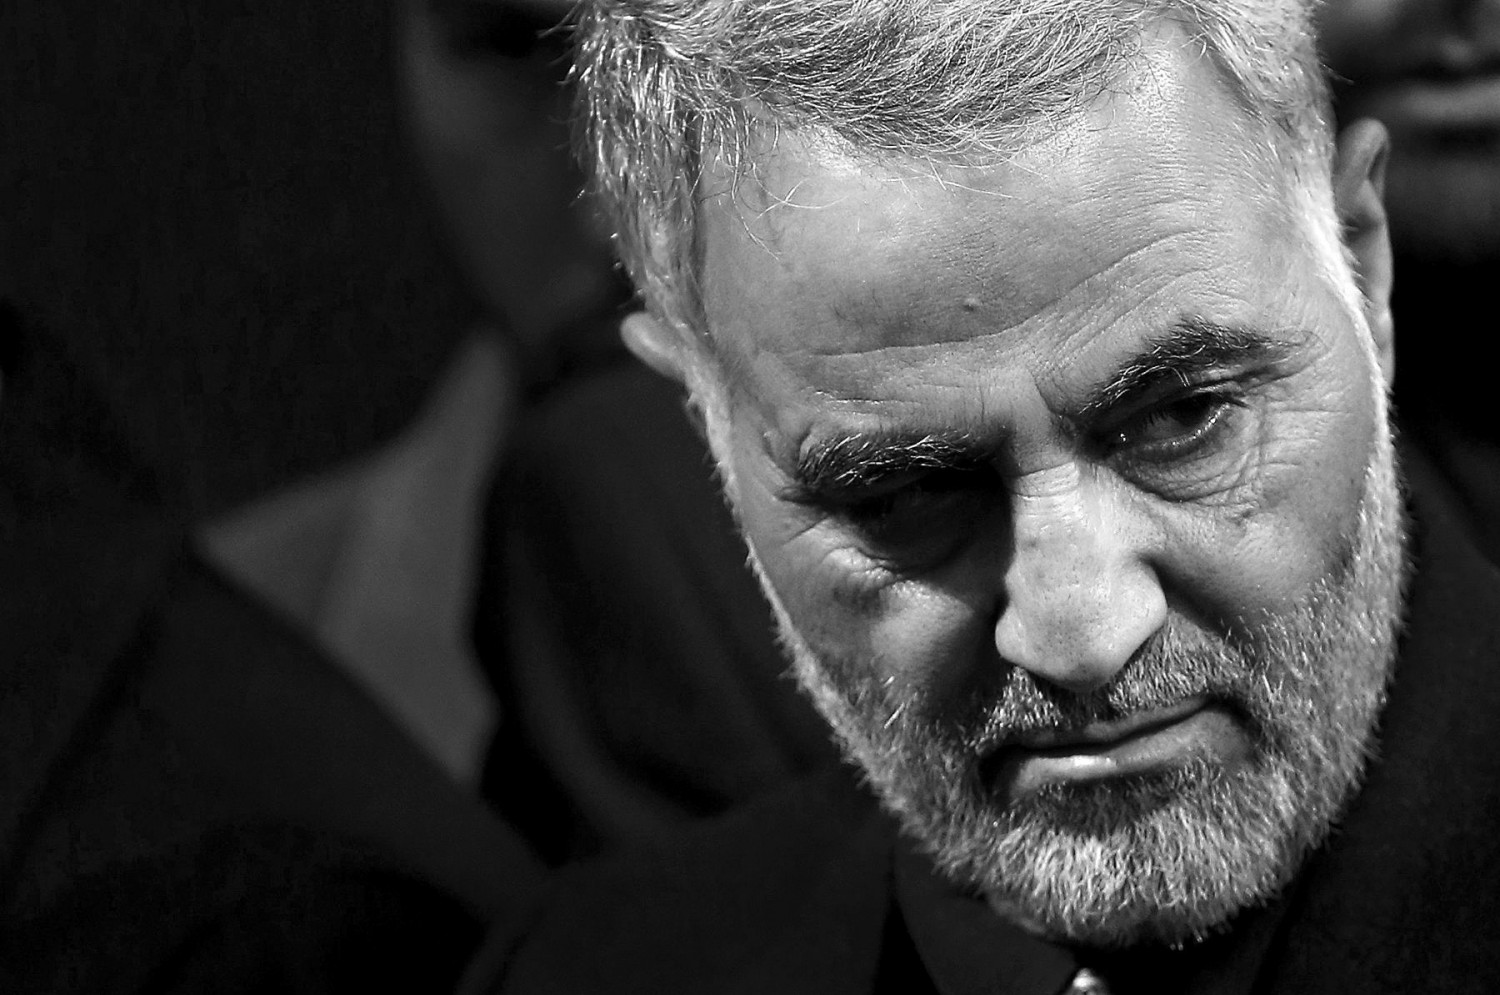 The Iranian commander Qassem Suleimani, who has been killed in a U.S. air strike, is a heavy blow to the regime. He was considered a pillar of the Iranian Revolution itself. Photograph from Sipa / AP